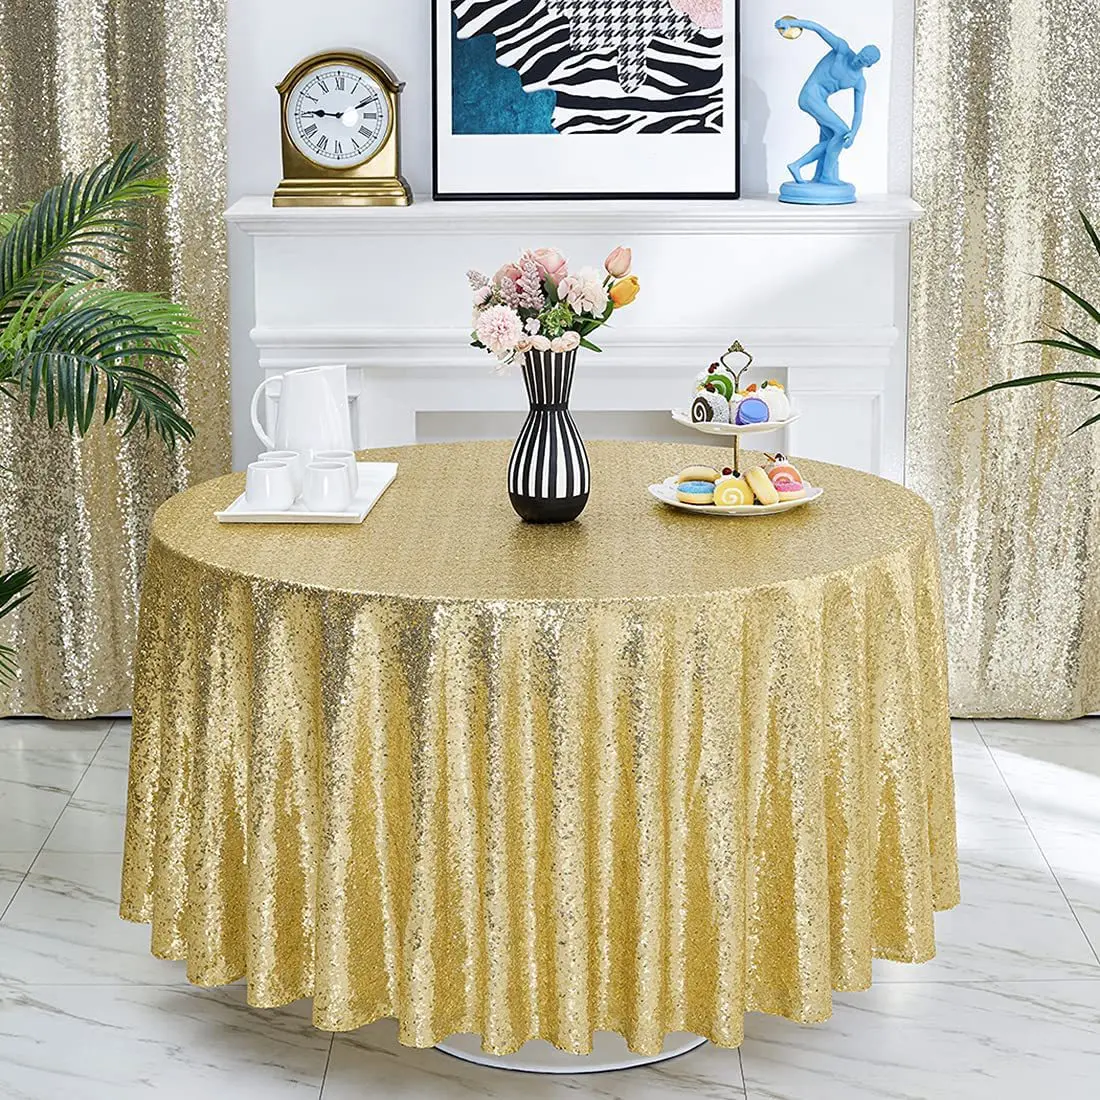 Rectangular Table Cover Glitter Sequin Table Cloth Rose Gold Silver Tablecloth for Wedding Party Hotel Home Decoration